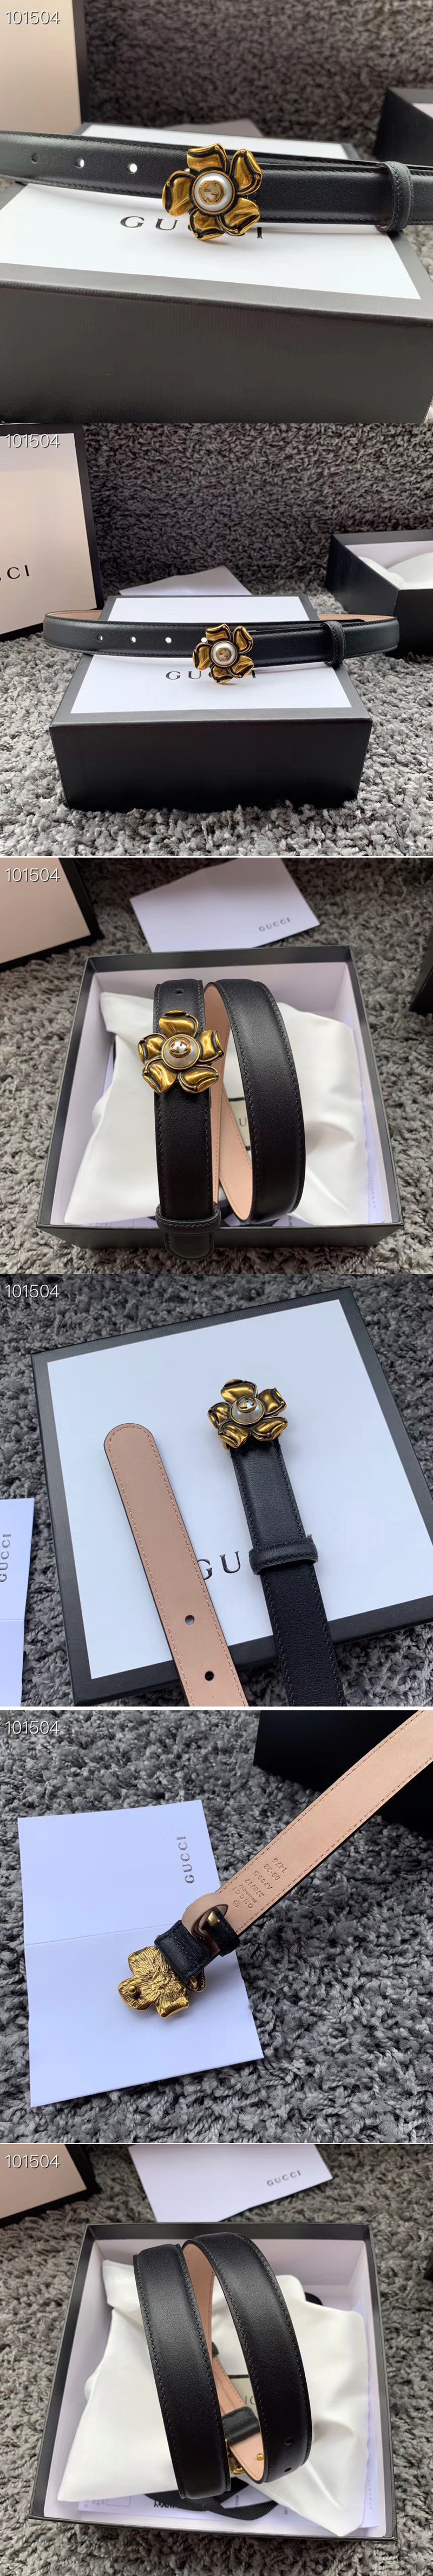 Replica Women's Gucci 370717 GG Marmont 25mm Leather belt with Flower Buckle in Black Leather